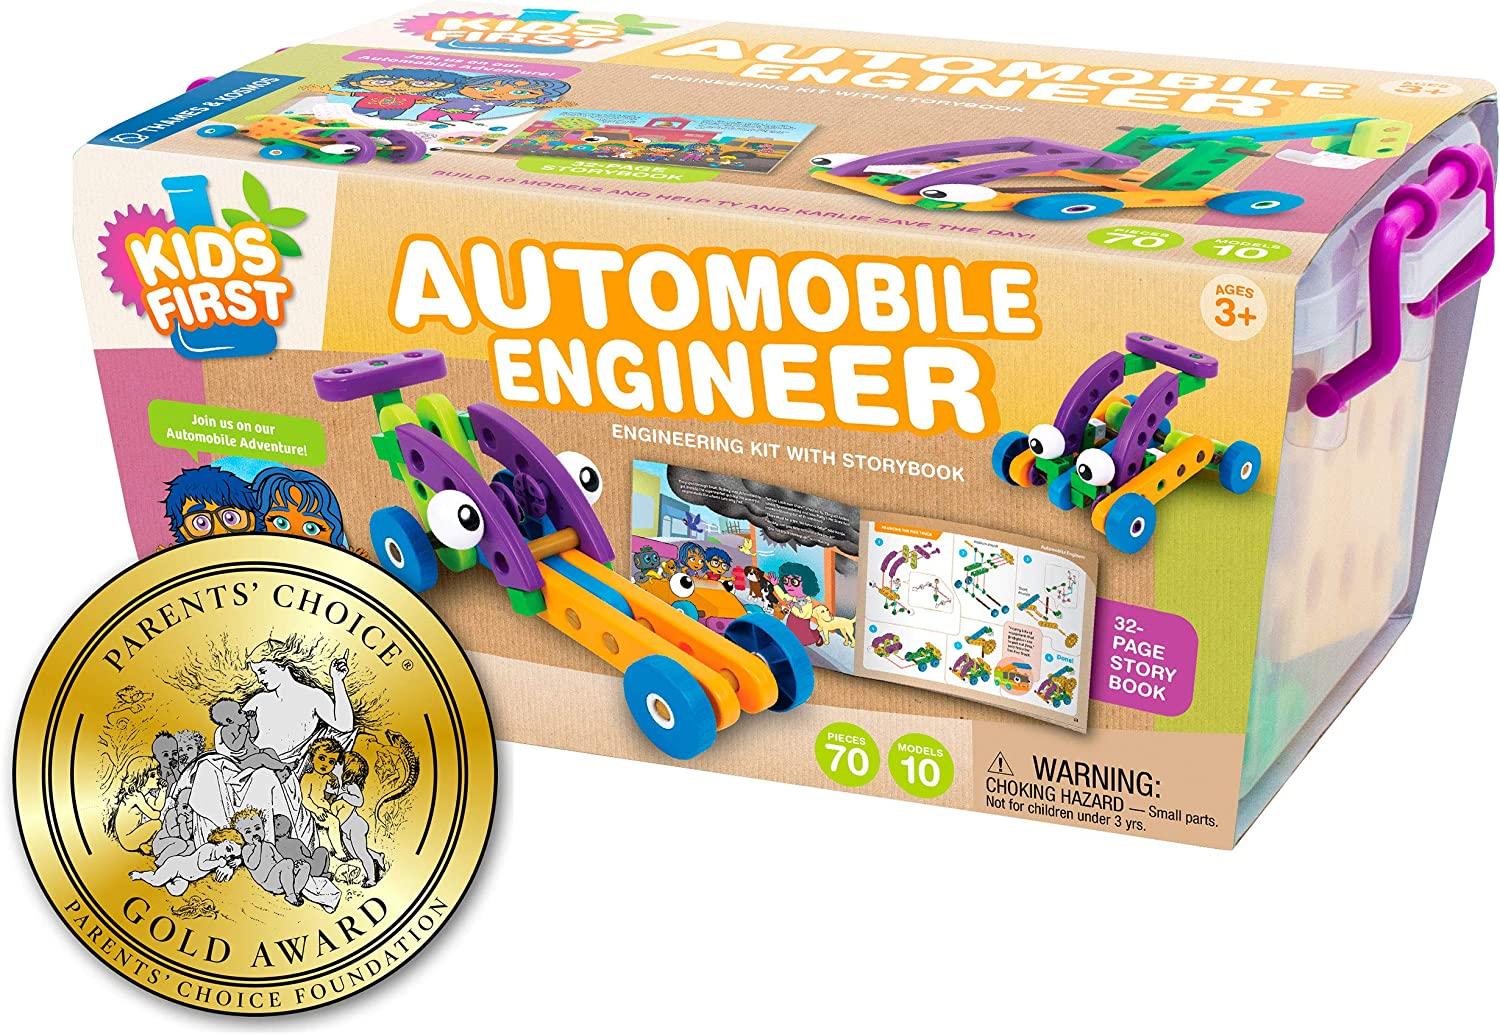 Thames and Kosmos Kids First Automobile Engineer Kit for $6.49